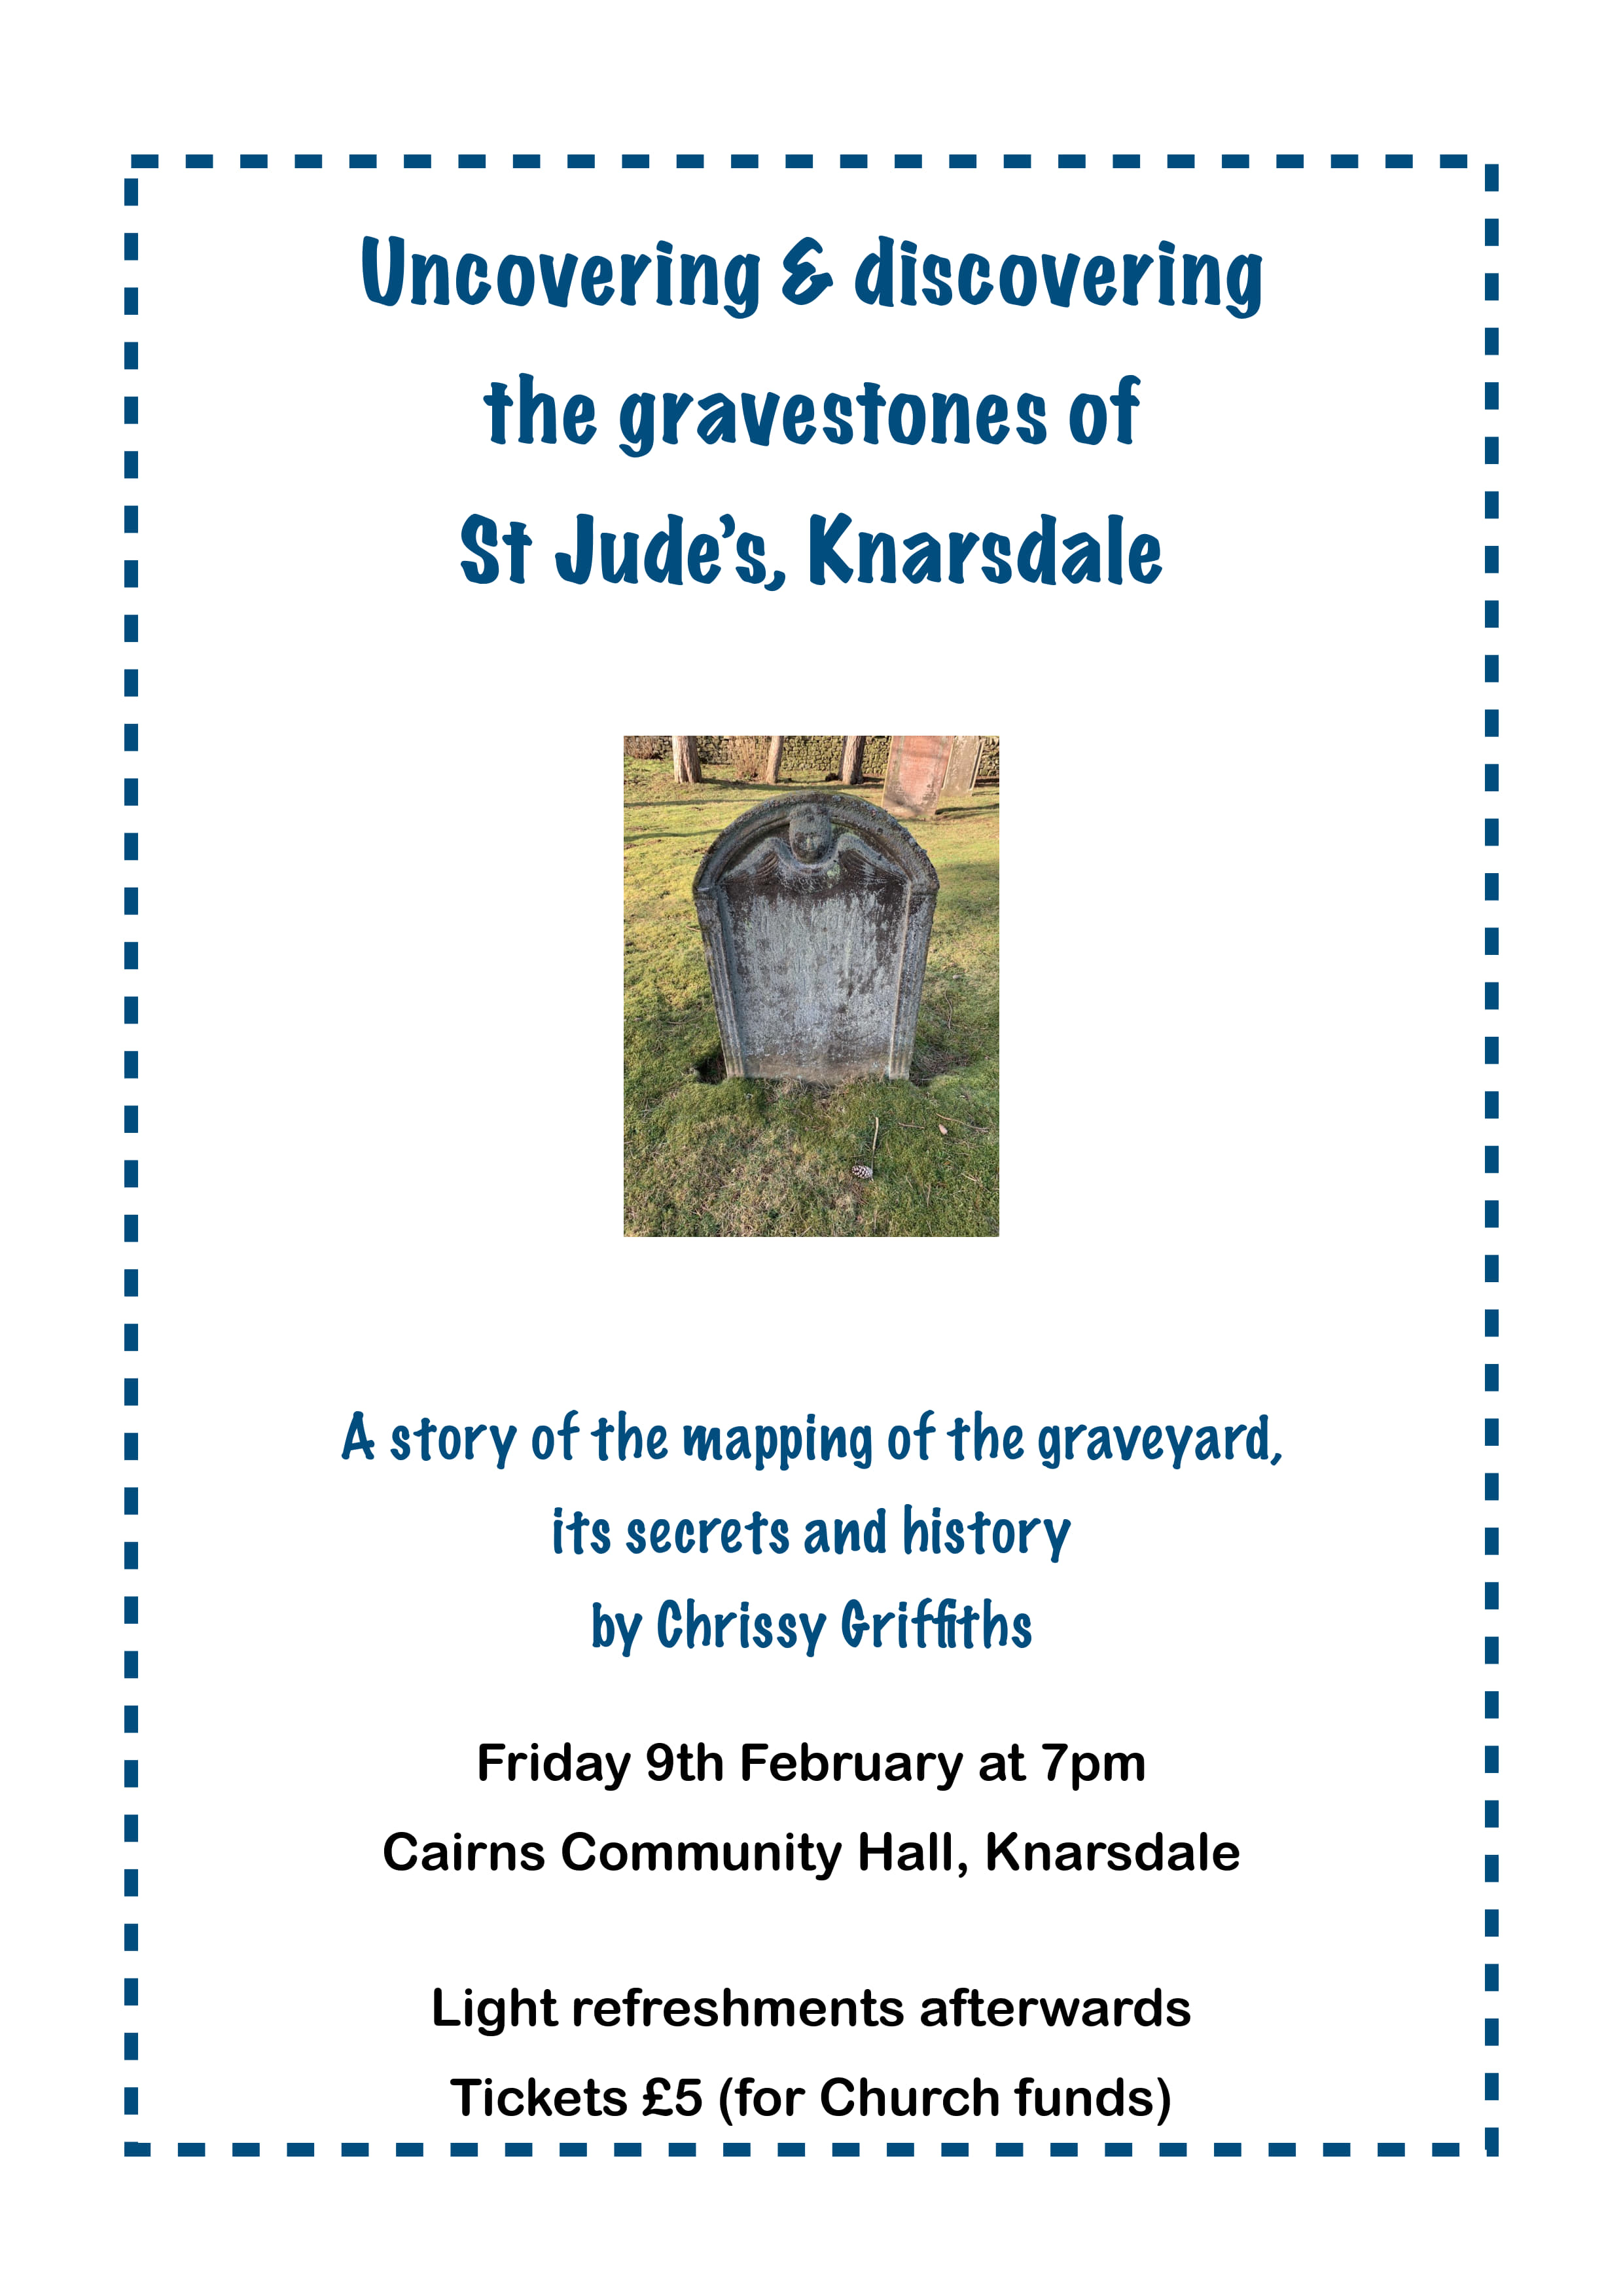 Uncovering & discovering the gravestones of St Jude’s, Knarsdale: 
A story of the mapping of the graveyard, its secrets and history by Chrissy Grifﬁths. 
Friday 9th February at 7pm, Cairns Community Hall, Knarsdale. 
Light refreshments afterwards. Tickets £5 (for Church funds) 